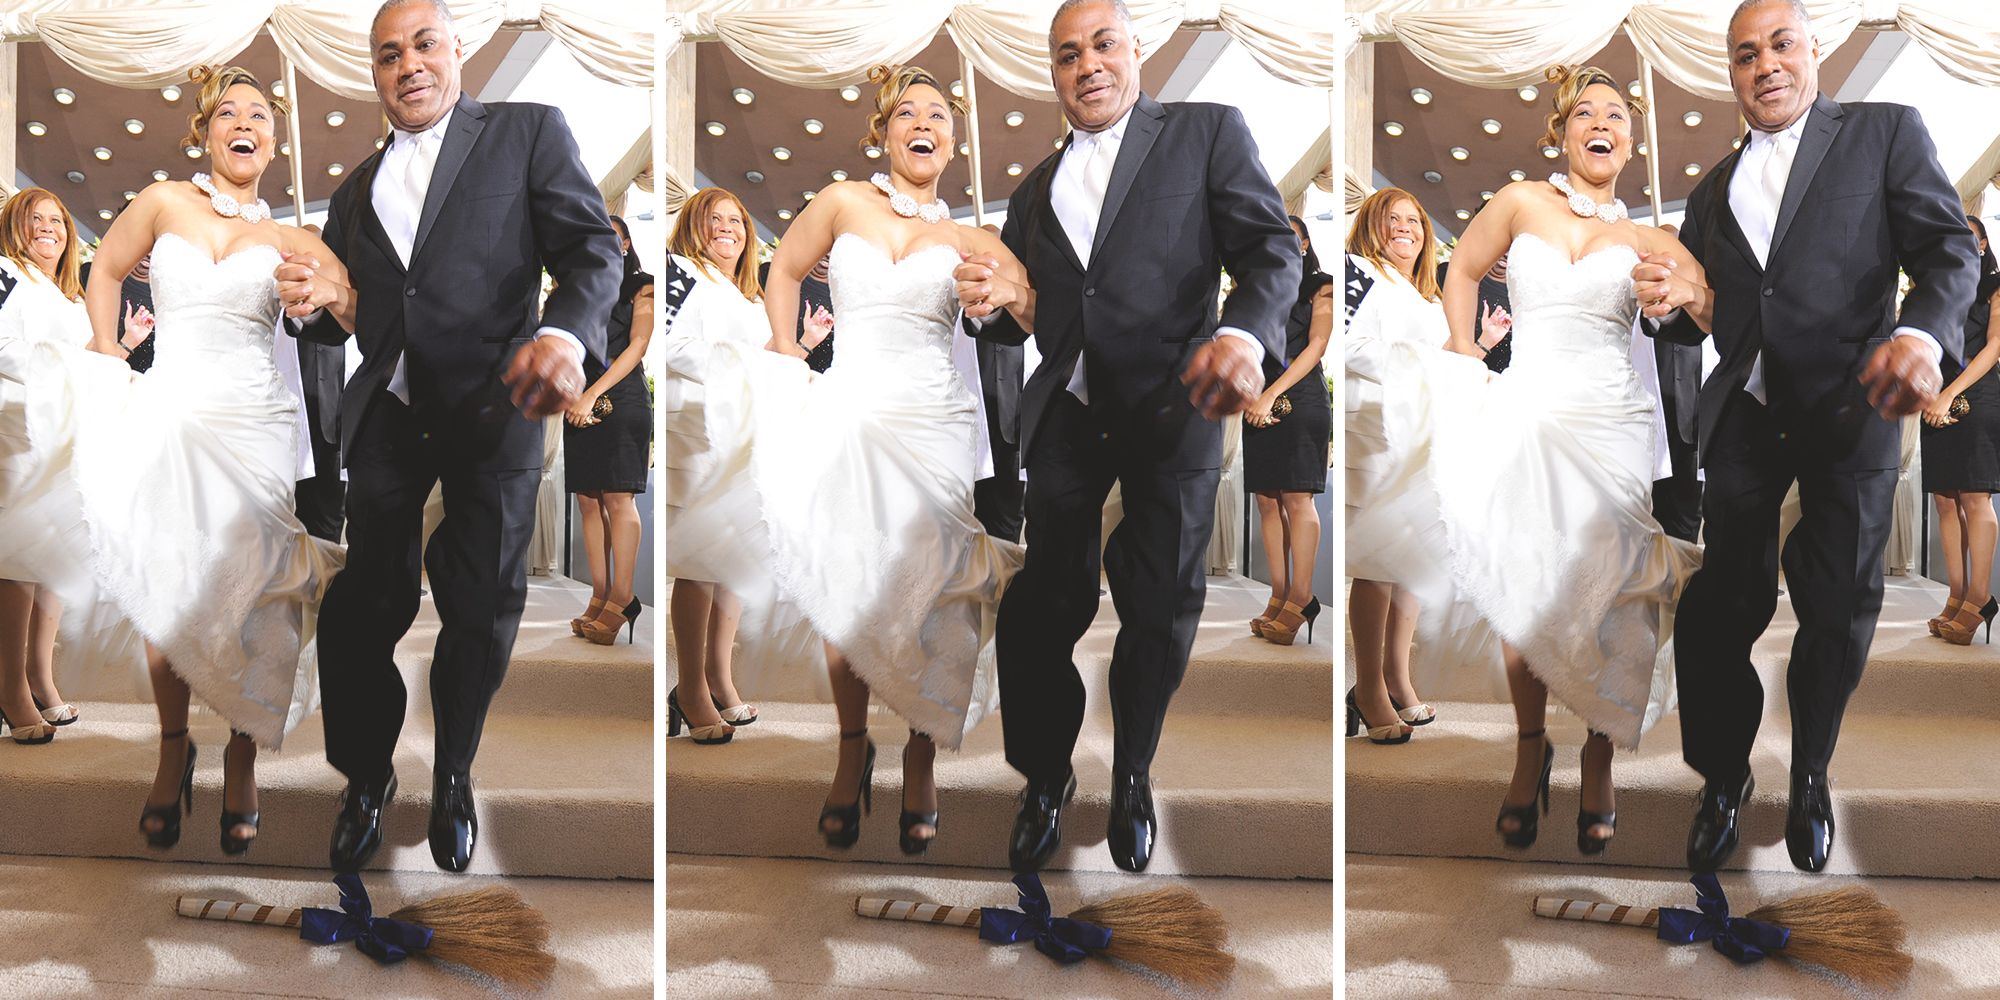 The History of Jumping the Broom As a Wedding Tradition